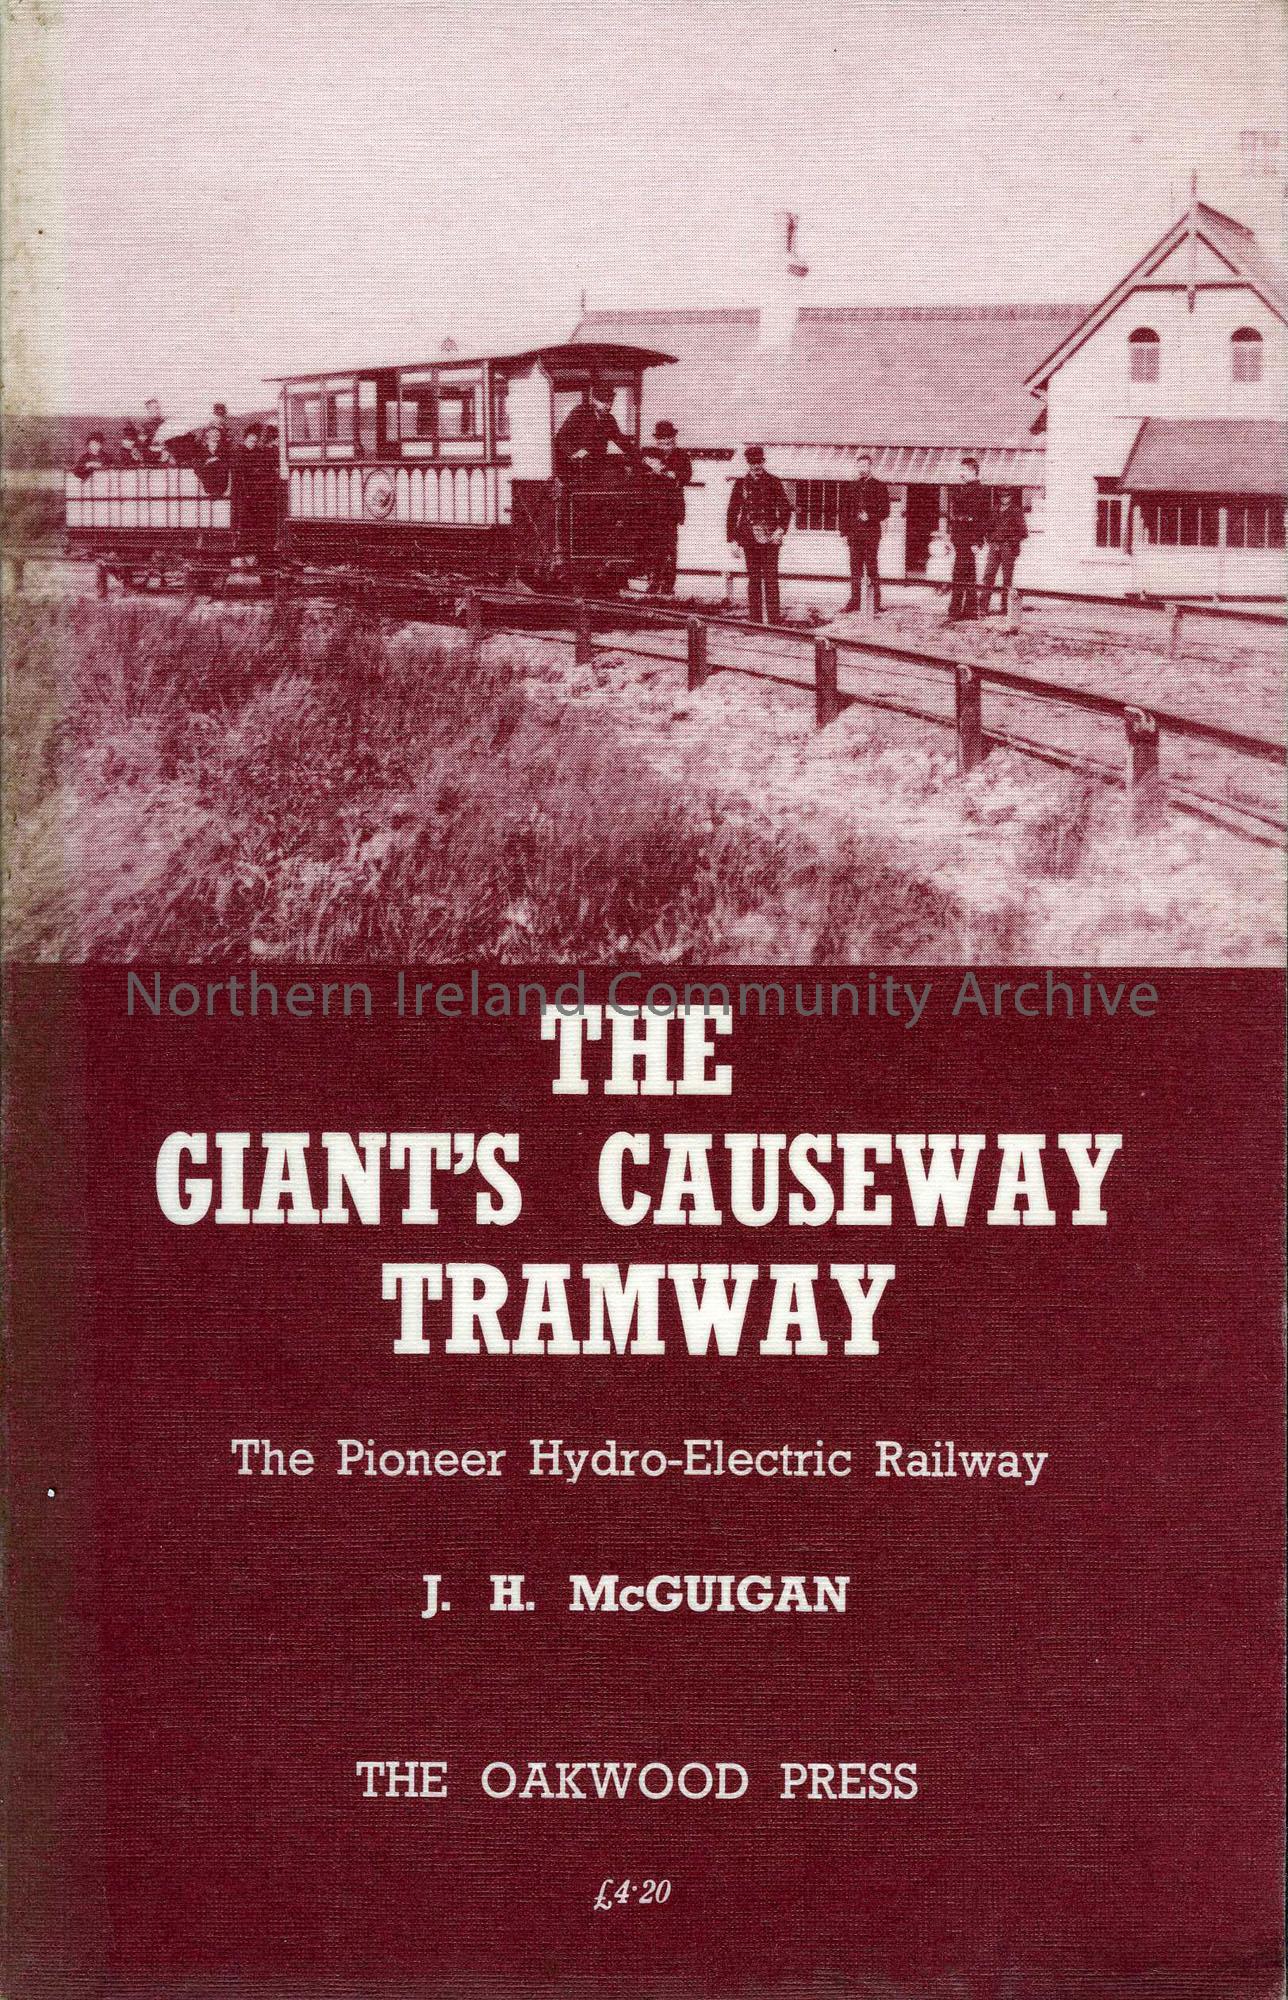 book titled, The Giant’s Causeway Tramway, The Pioneer Hydro-Electric Railway. By J.H.McGuigan (3778)